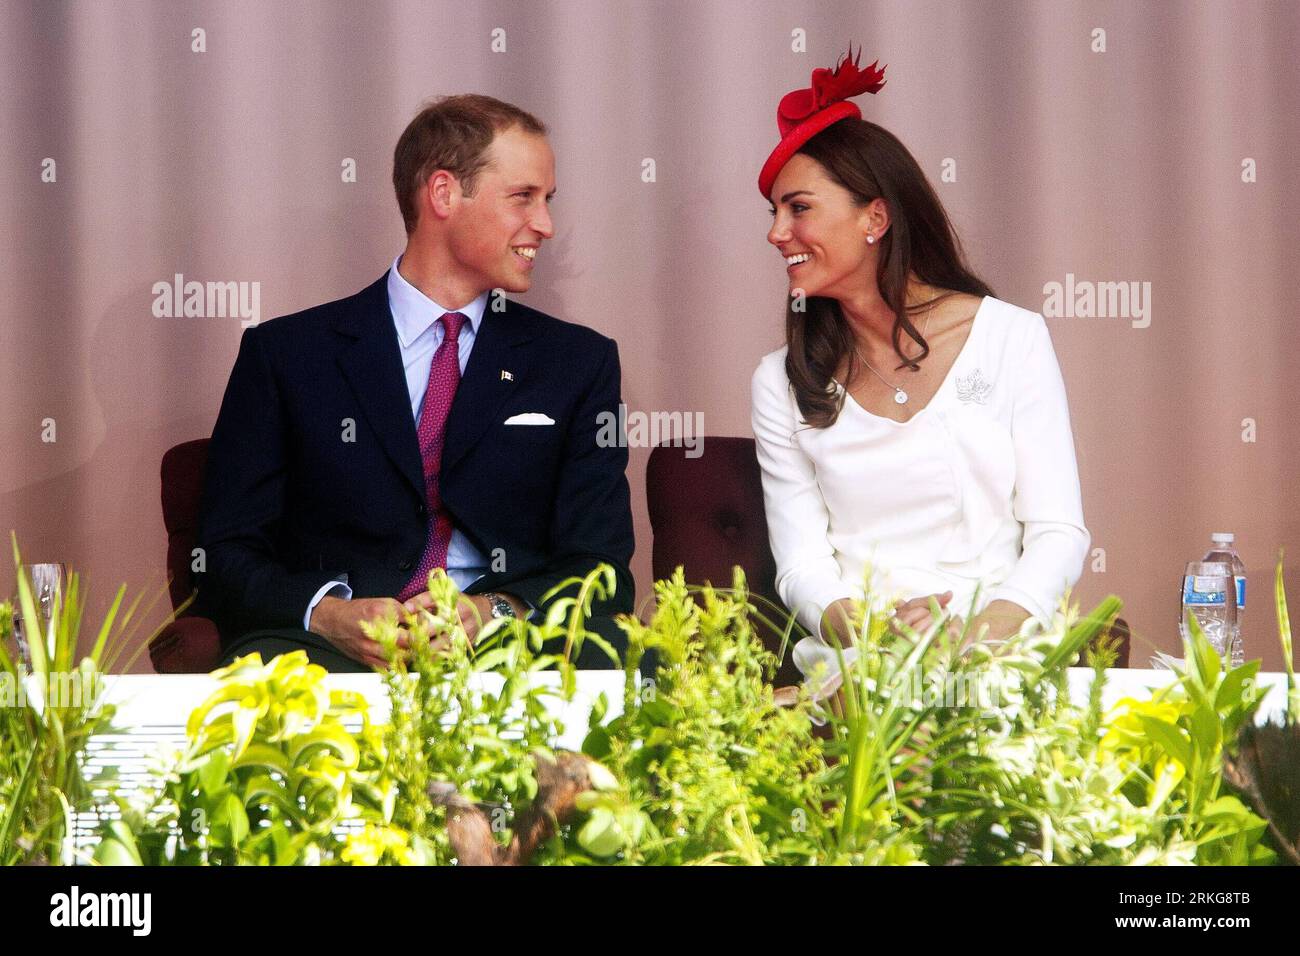 Bildnummer: 55565402  Datum: 01.07.2011  Copyright: imago/Xinhua (110702)-- OTTAWA, July 2, 2011 (Xinhua) -- Britain s Prince William and his wife Kate attend the 144th Canada Day celebrations on Parliament Hill in Ottawa, Canada, on July 1, 2011. The Royal couple is on a nine-day official visit to Canada, their first overseas trip since being married.(Xinhua/Christopher Pike)(zl) CANADA-CANADA DAY-CELEBRATION PUBLICATIONxNOTxINxCHN People Entertainment Adel GBR Königshaus Familie Frau Ehefrau Kate xda x0x premiumd Middleton 2011 quer   Catherine Duchess Cambridge    Bildnummer 55565402 Date 0 Stock Photo